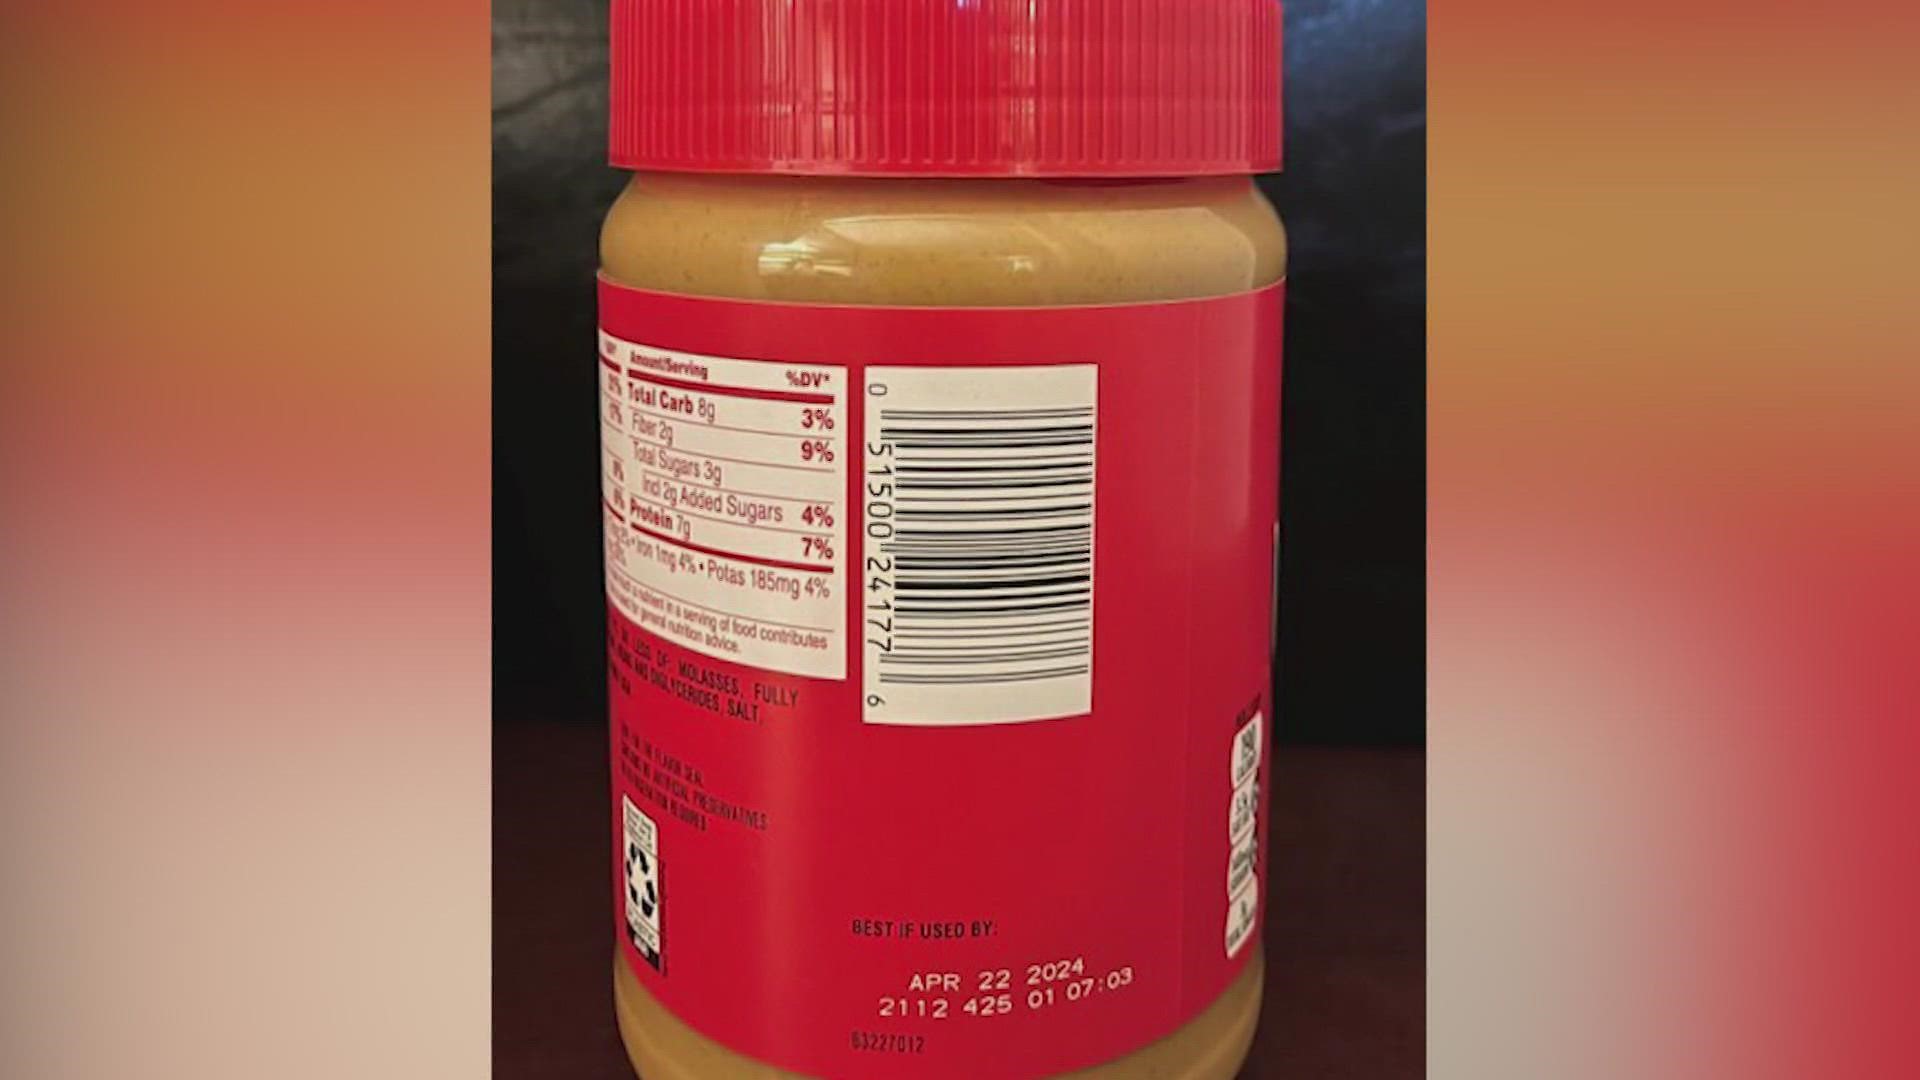 Because peanut butter has a very long shelf life, be sure to check all Jif peanut butter you have at home to check whether it's part of the recall.